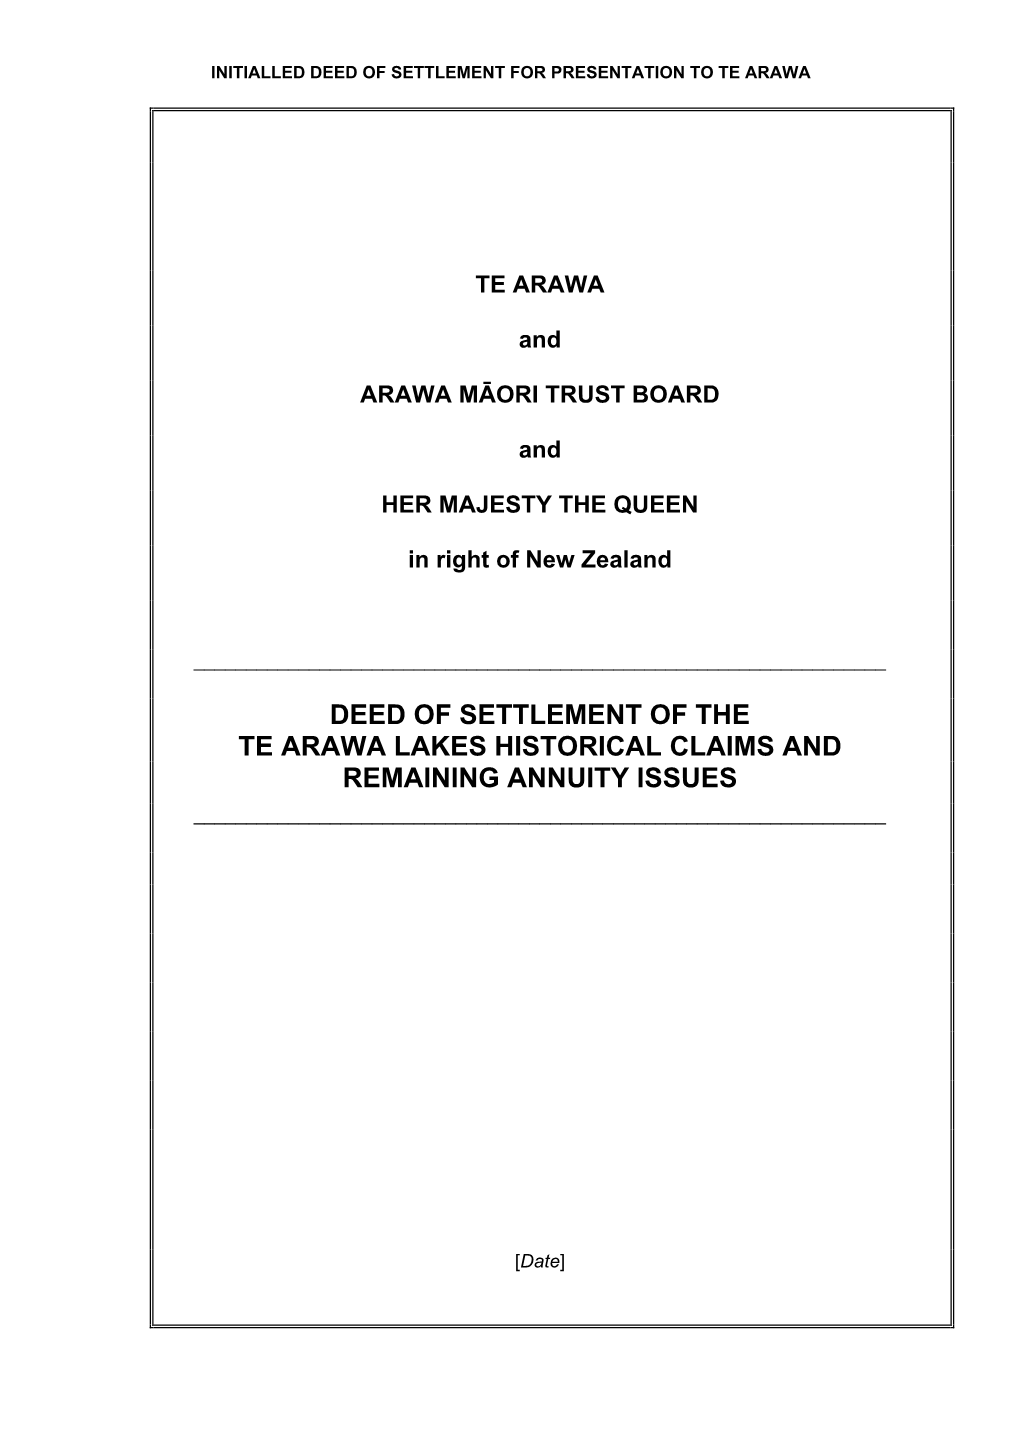 Deed of Settlement of the Te Arawa Lakes Historical Claims and Remaining Annuity Issues ______